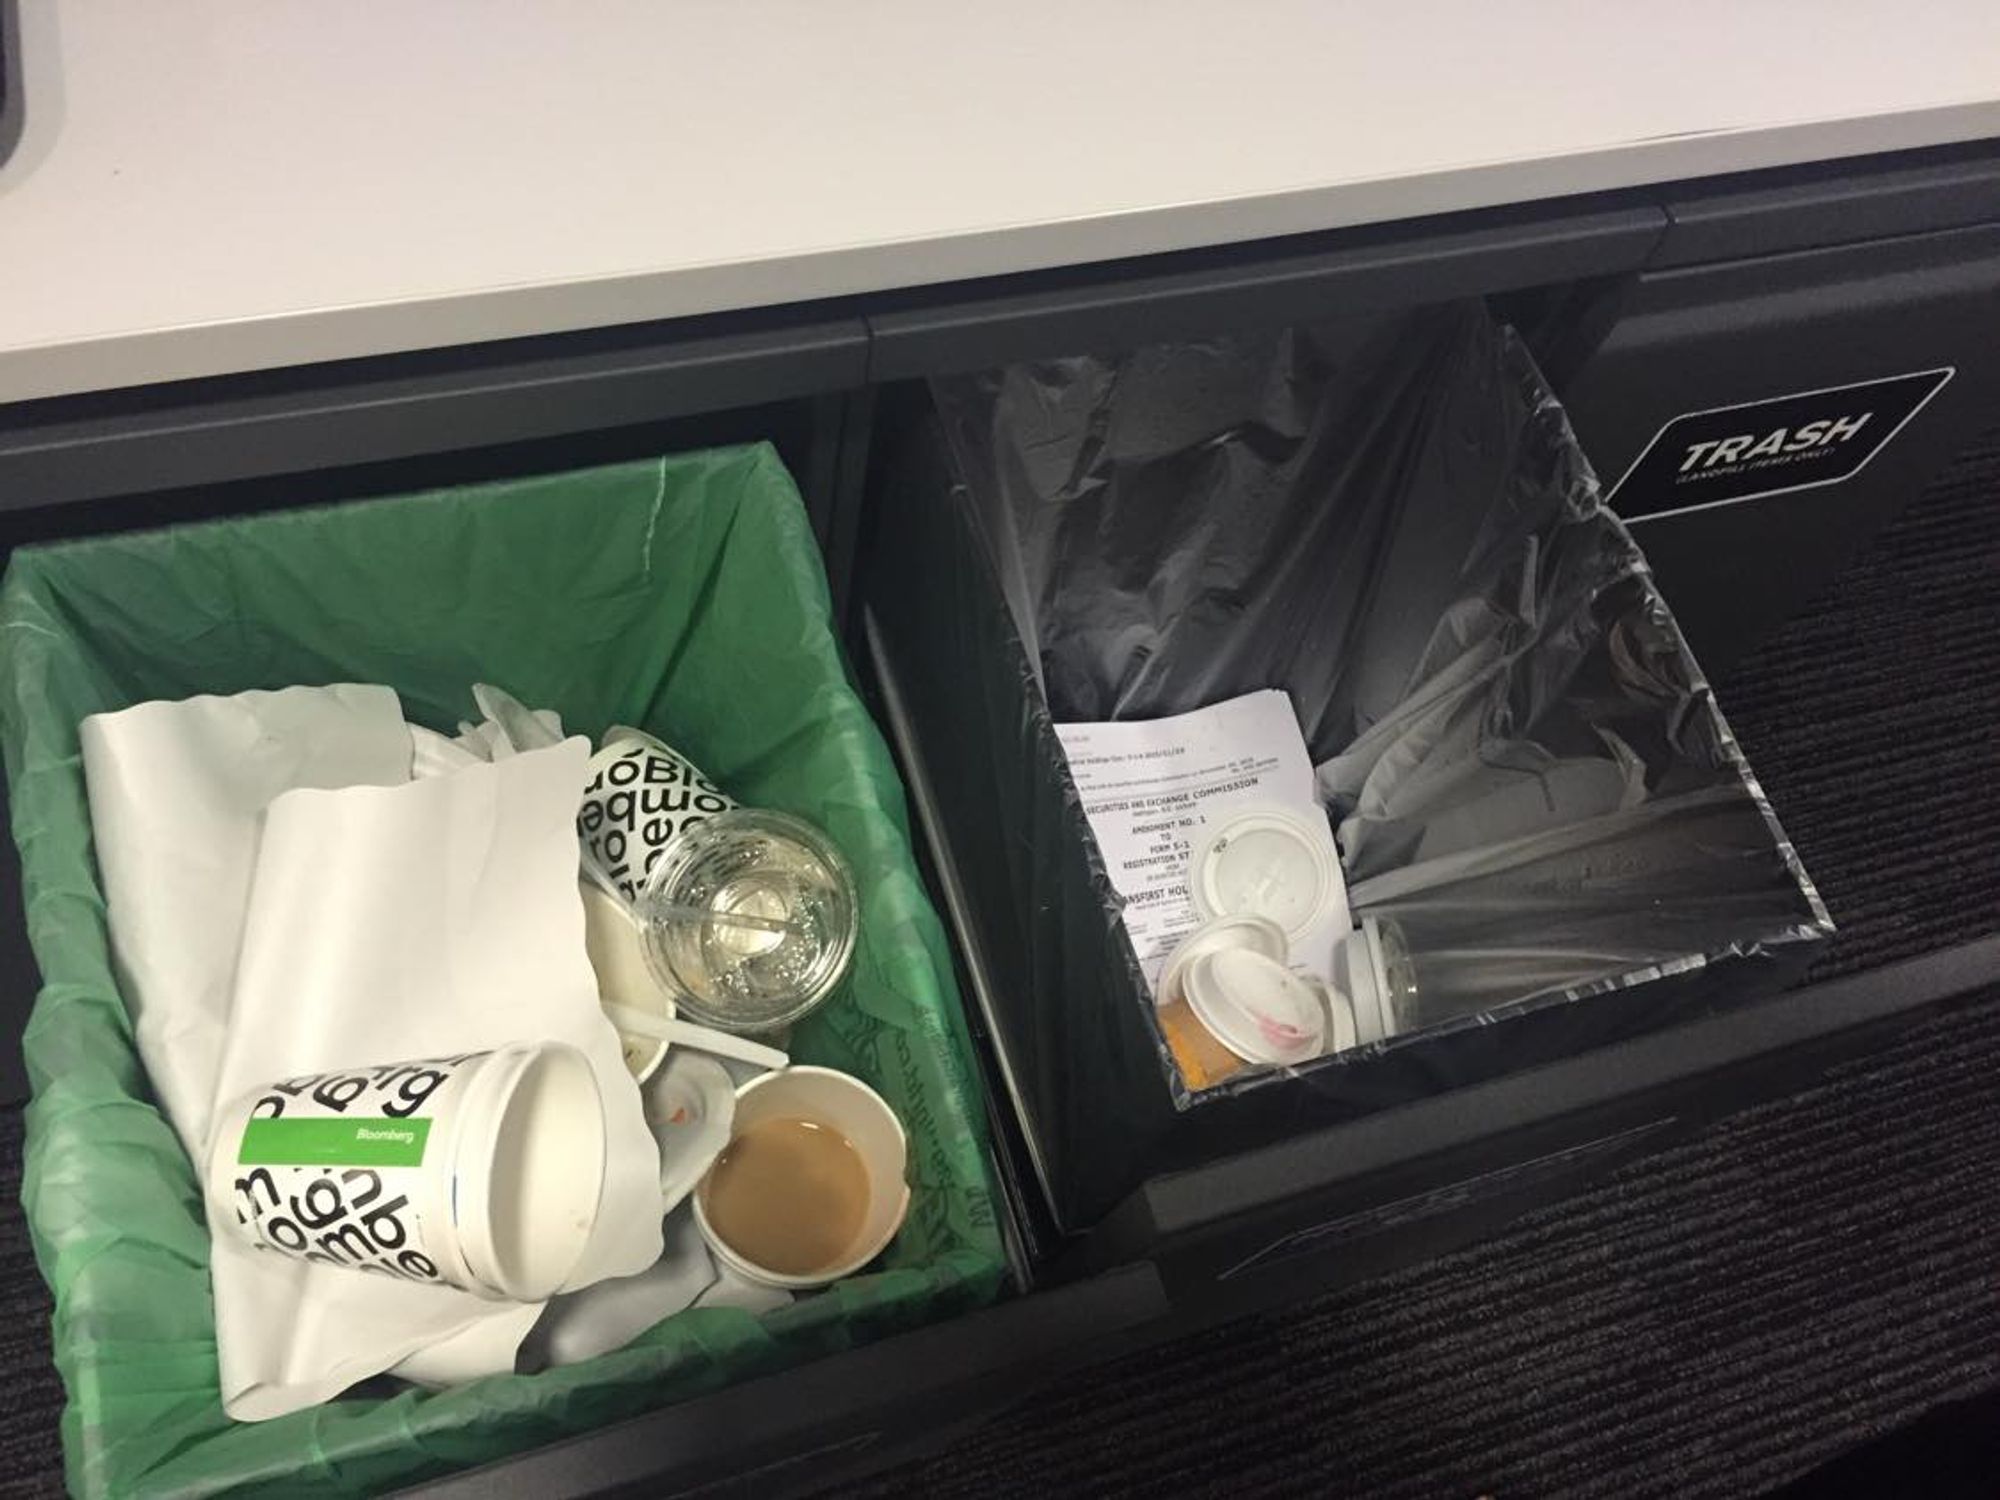 An example of what some of the bins frequently consist of - a mix of compostable, recyclable and landfill items. The green bin on the left is compost, and the black bin on the right is plastic and metal recycling. Note that they contain almost the same items, despite having different requirements for sorting. 